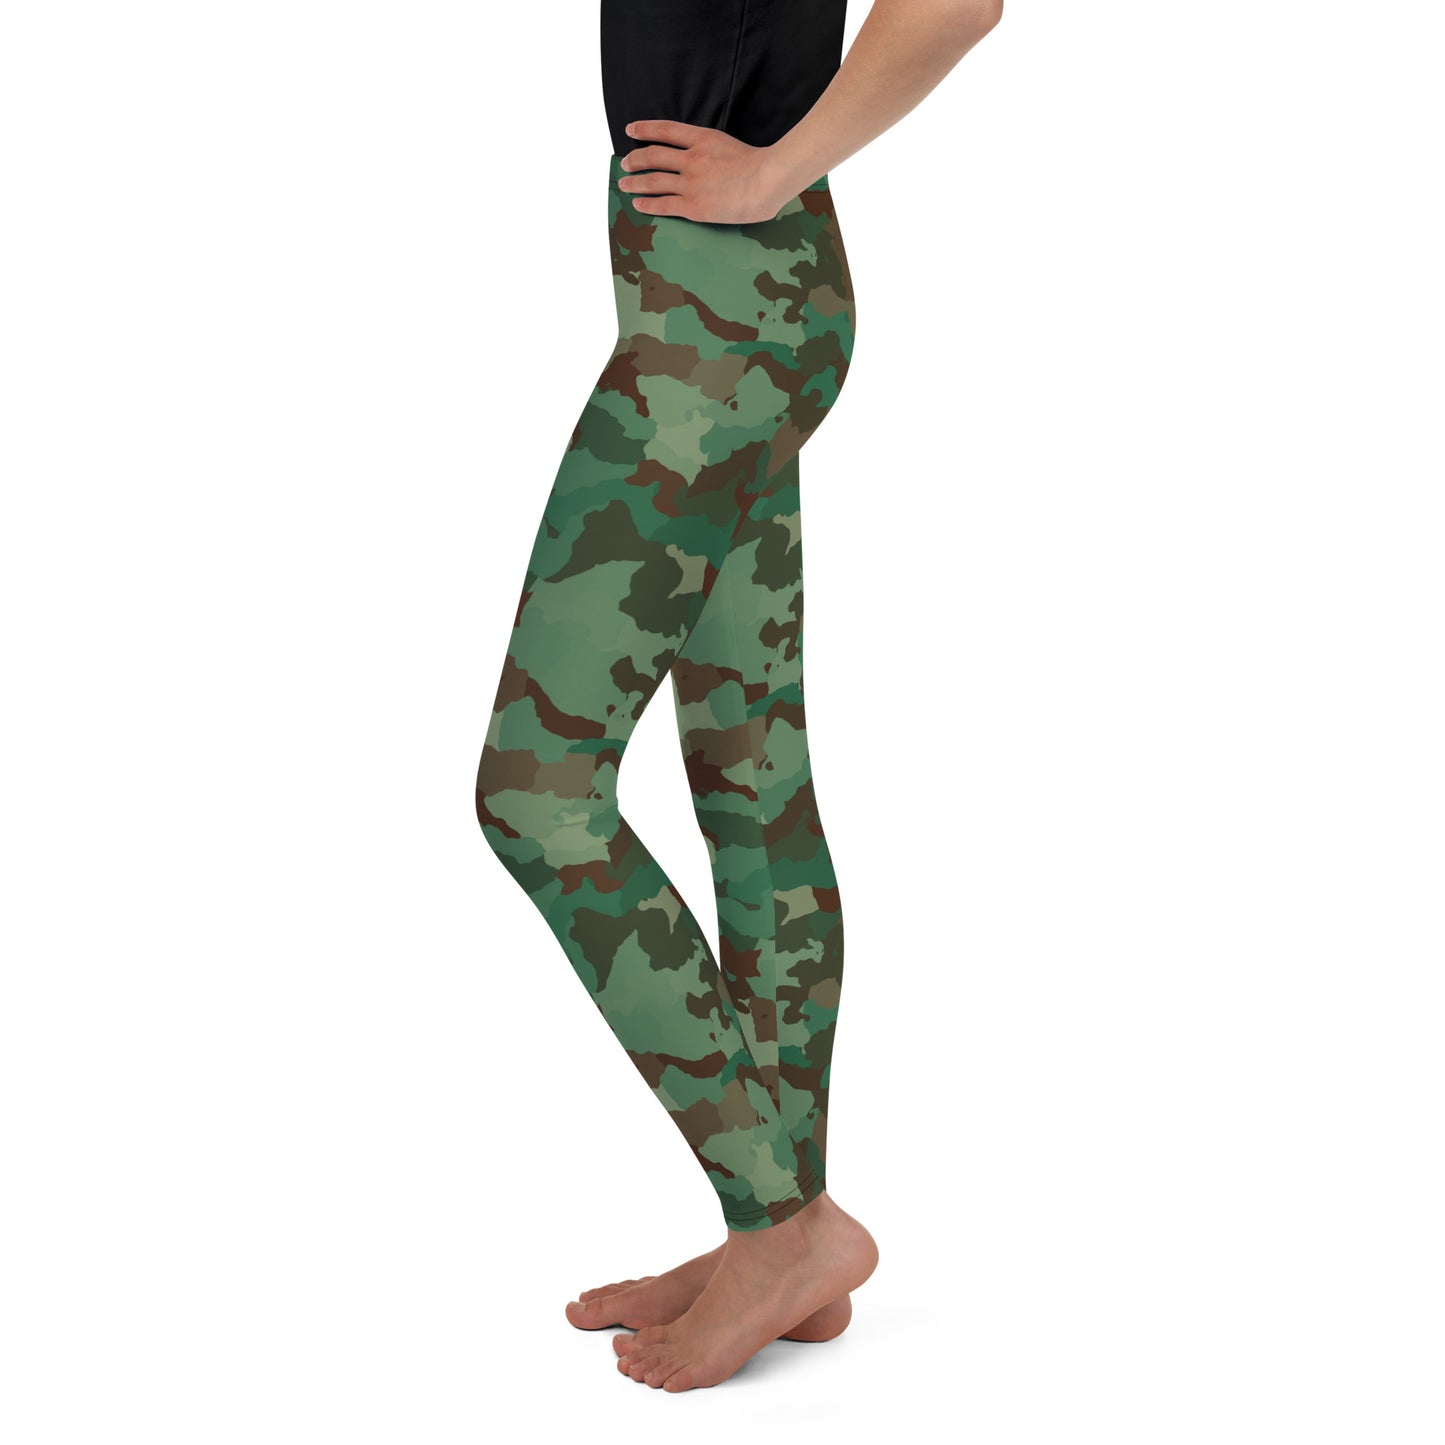 Youth Leggings - Green Brown & Black Camouflage